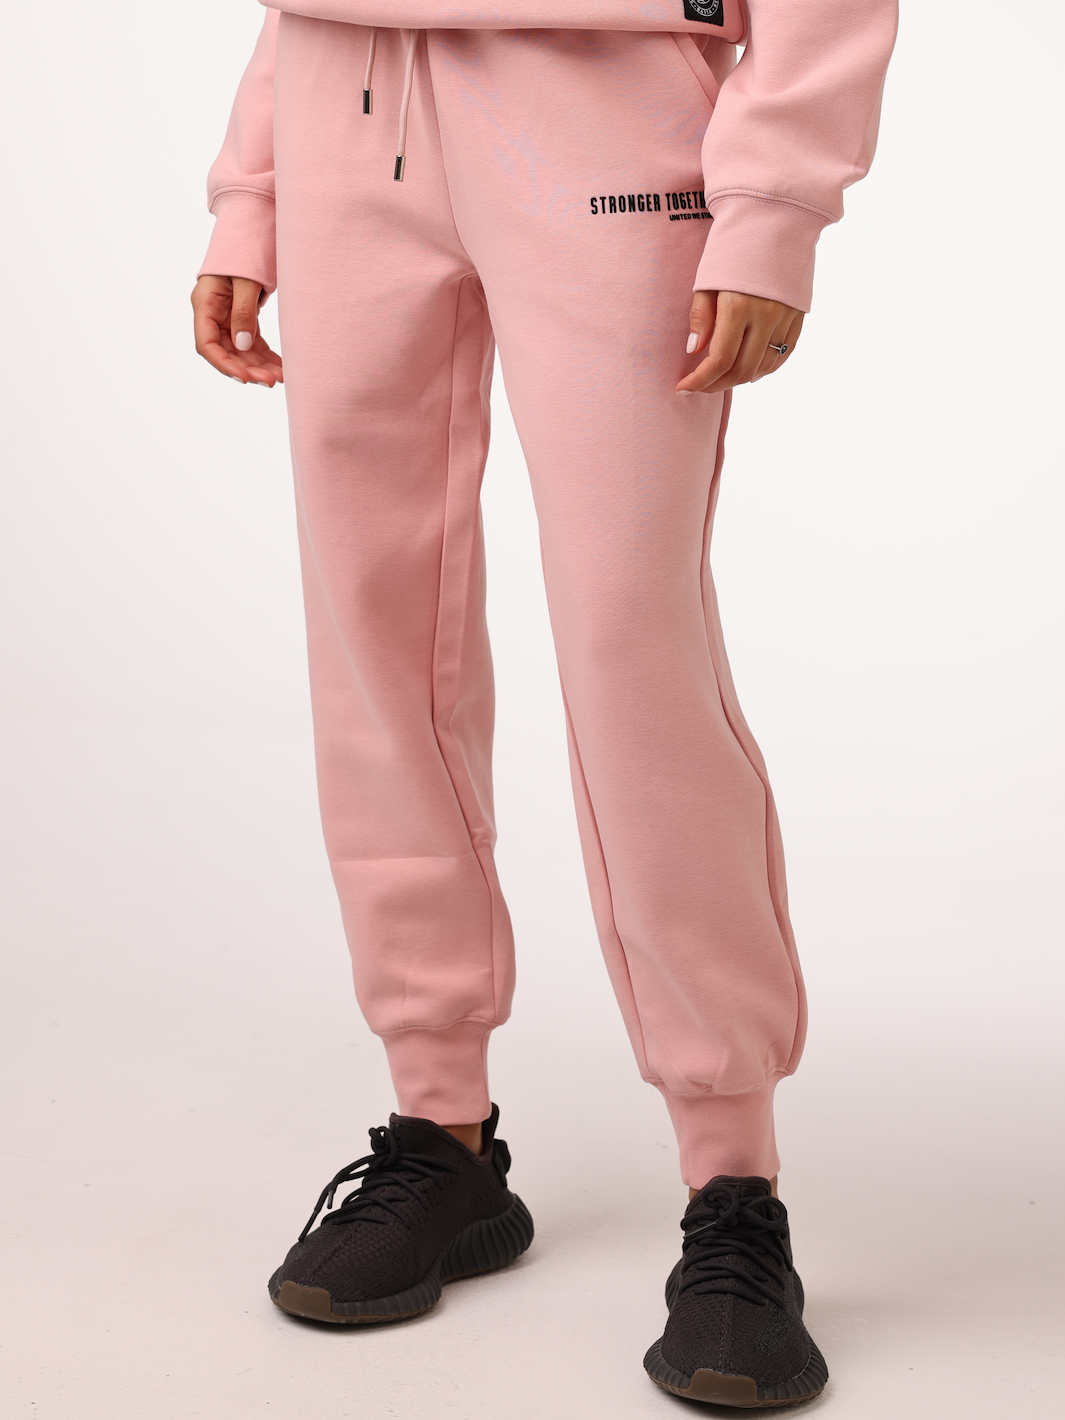 Unisex Limited Edition Pant